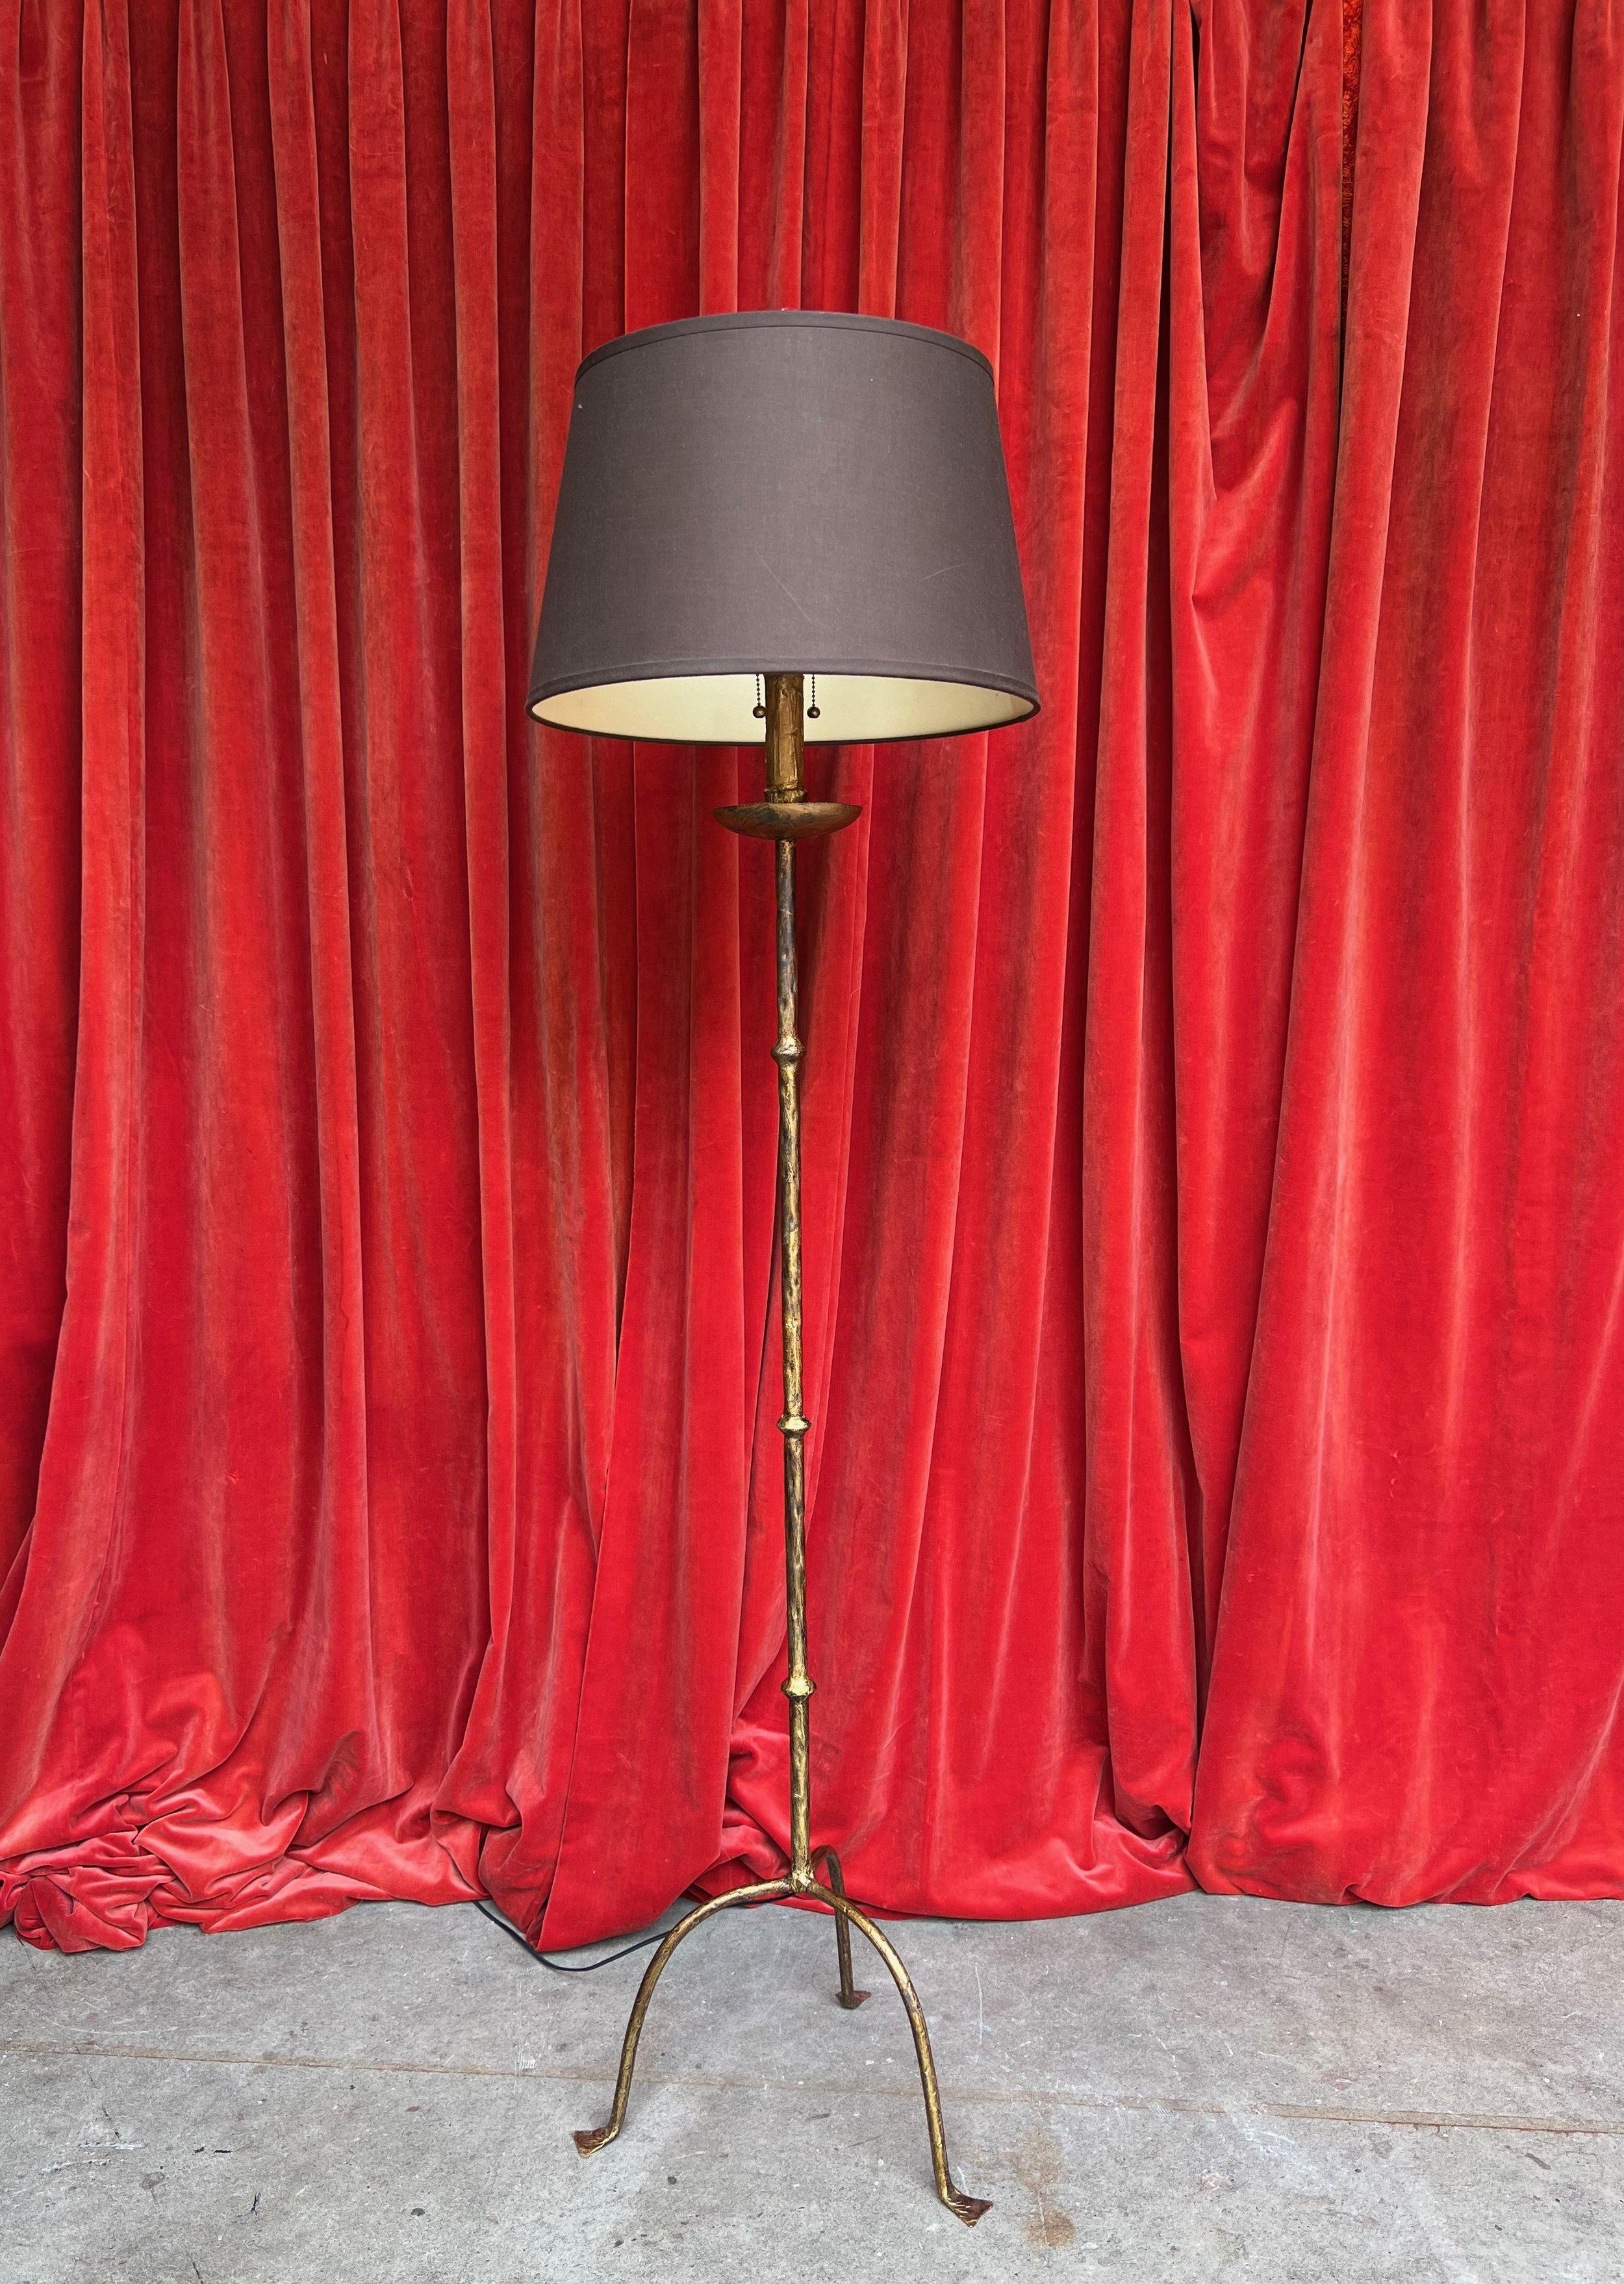 An elegant Spanish gilt iron floor lamp from the 1950s, featuring a striking wrought iron design on an elongated tripod base with a rich gold finish. The central stem displays three understated spherical details, enhancing its aesthetic appeal. The